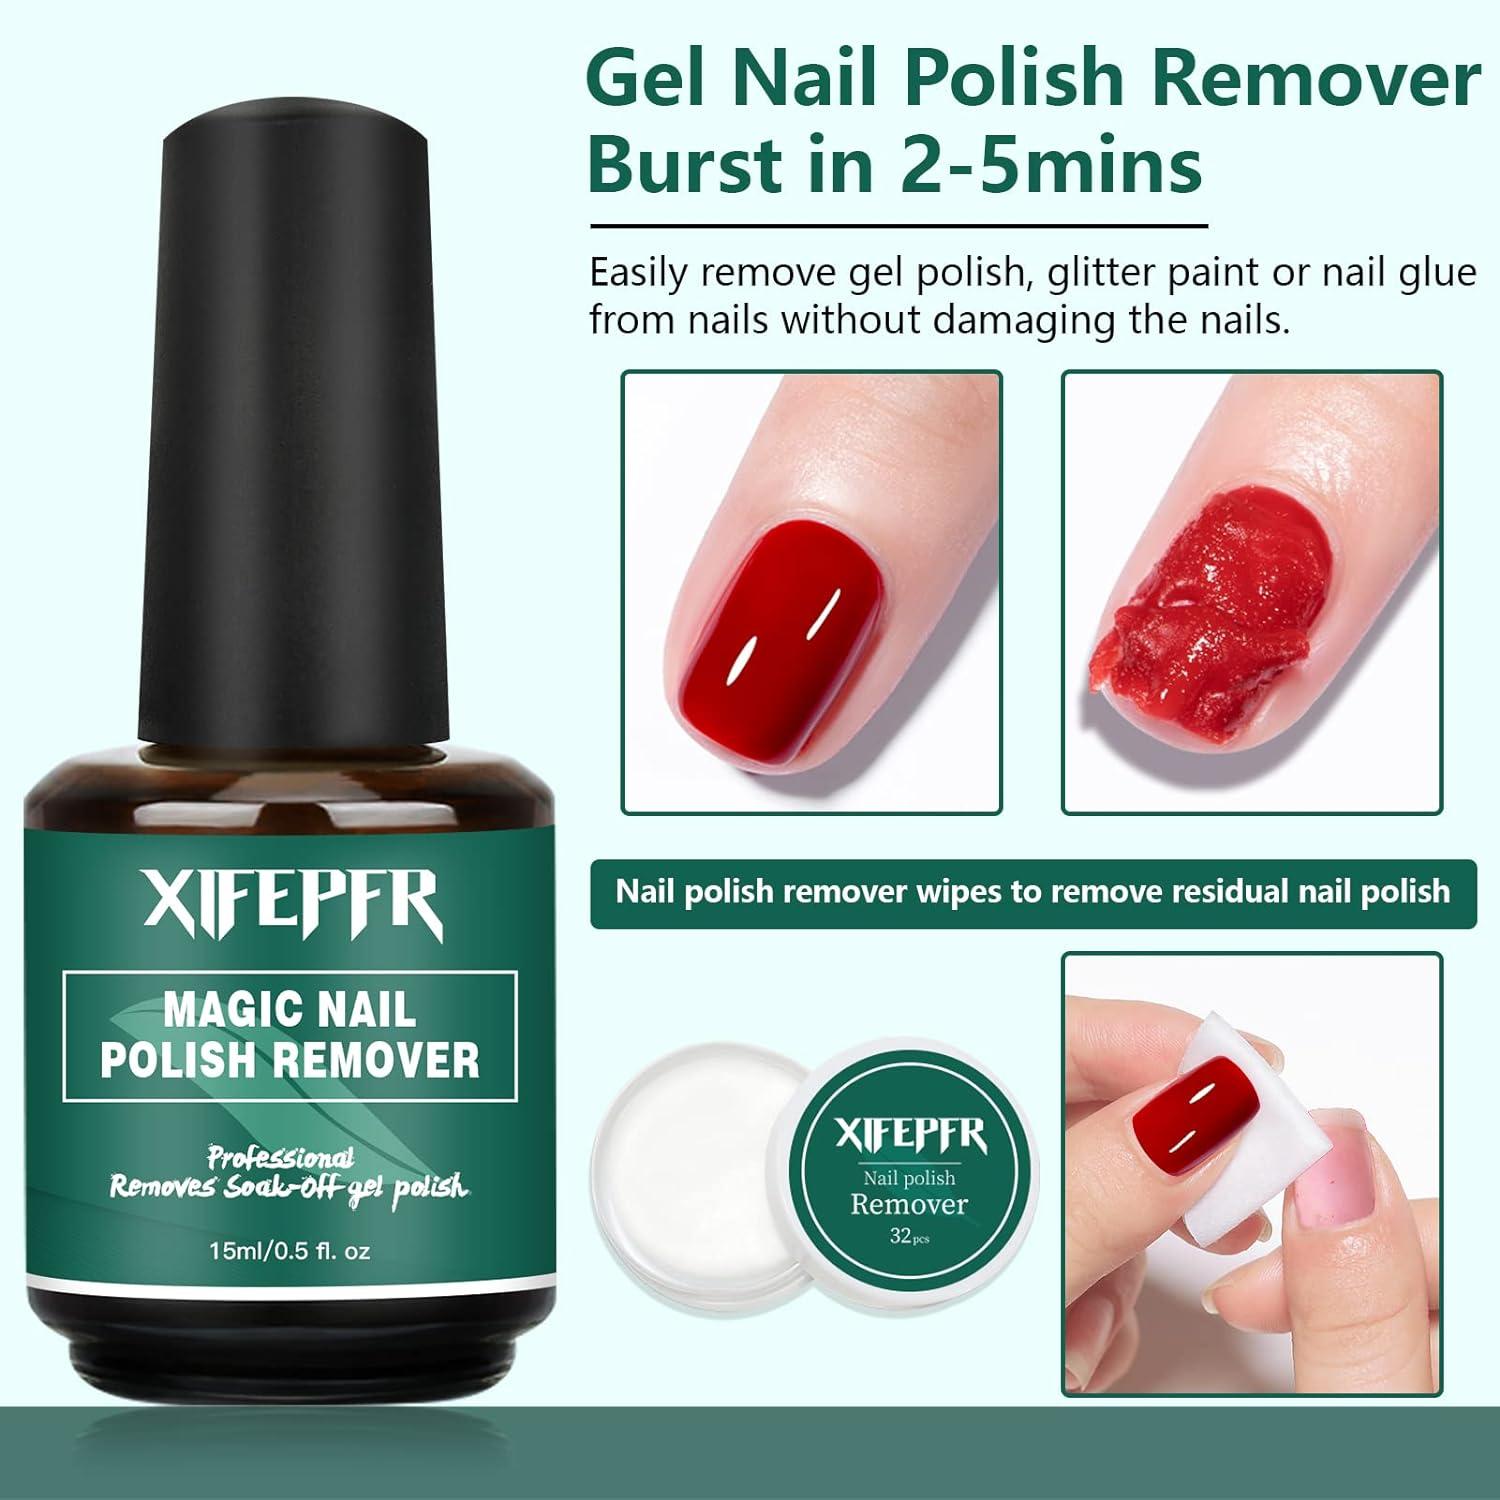 Buy Elle 18 Nail Paint Remover Online at Low Prices in India - Amazon.in